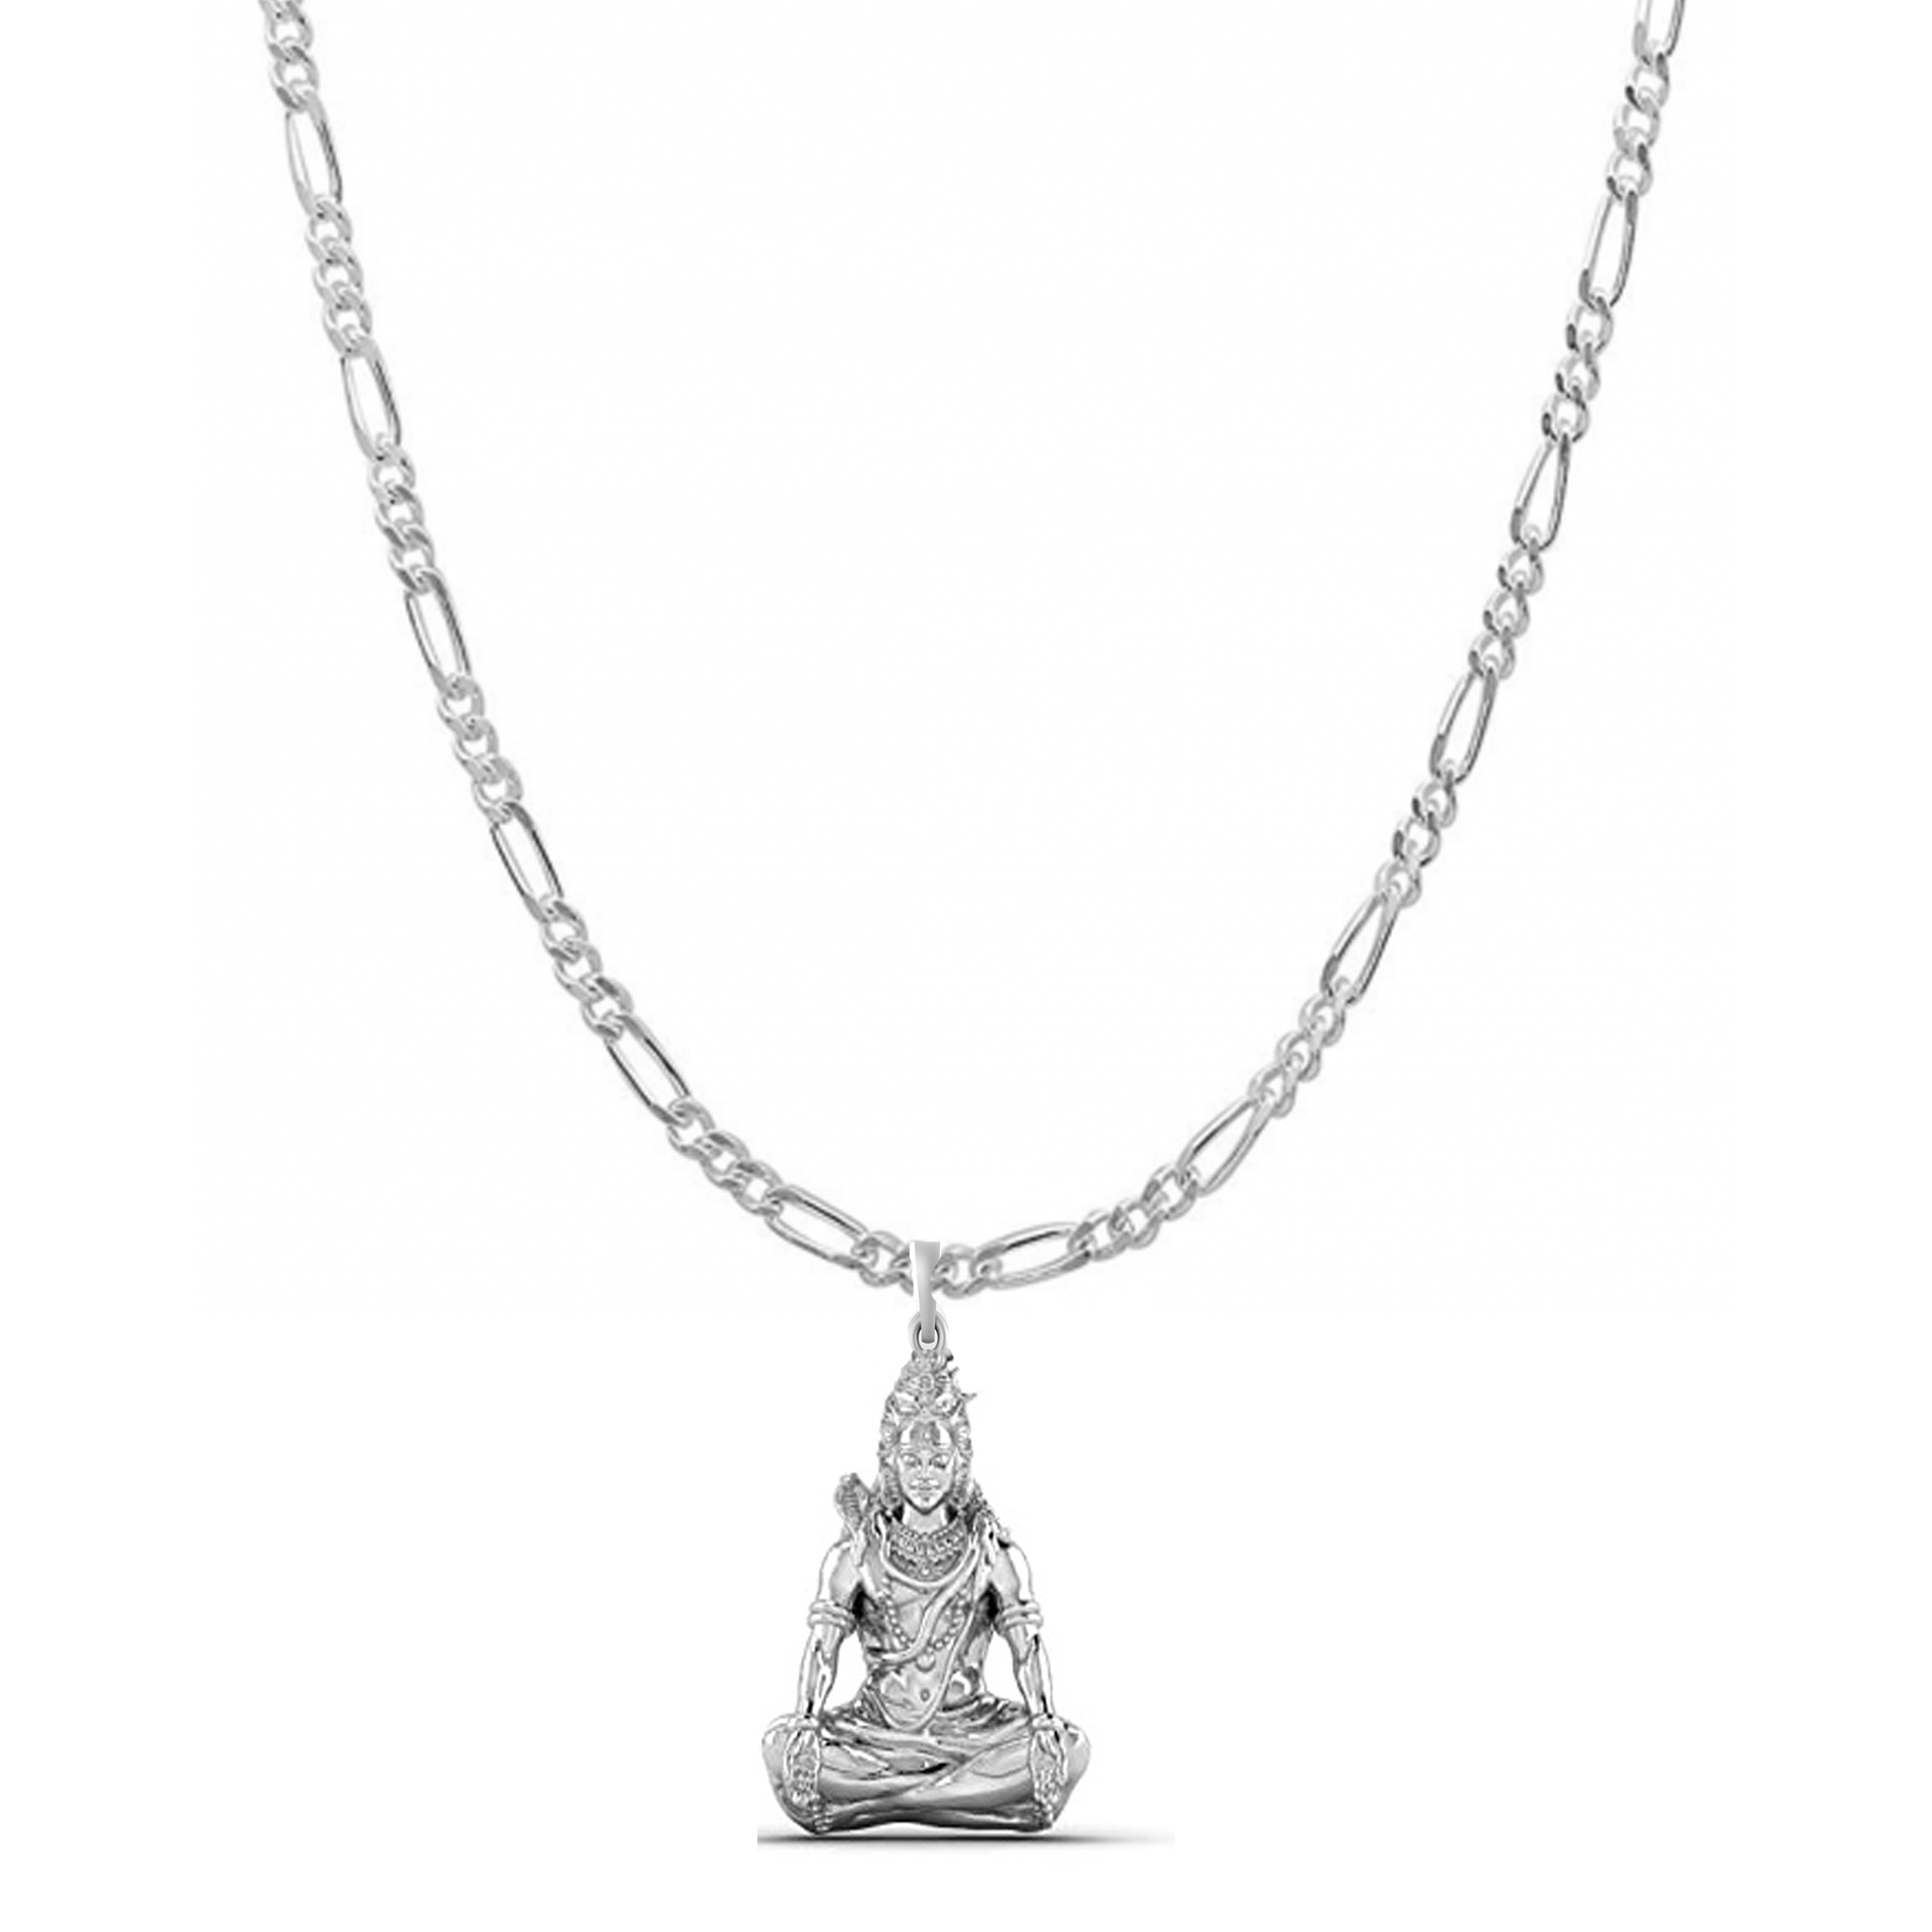 Akshat Sapphire Sterling Silver (92.5% purity) God Shiva Chain Pendant (Pendant with Figaro Chain) for Men & Women Pure Silver Lord Shiv Chain Locket for Good Health & Wealth